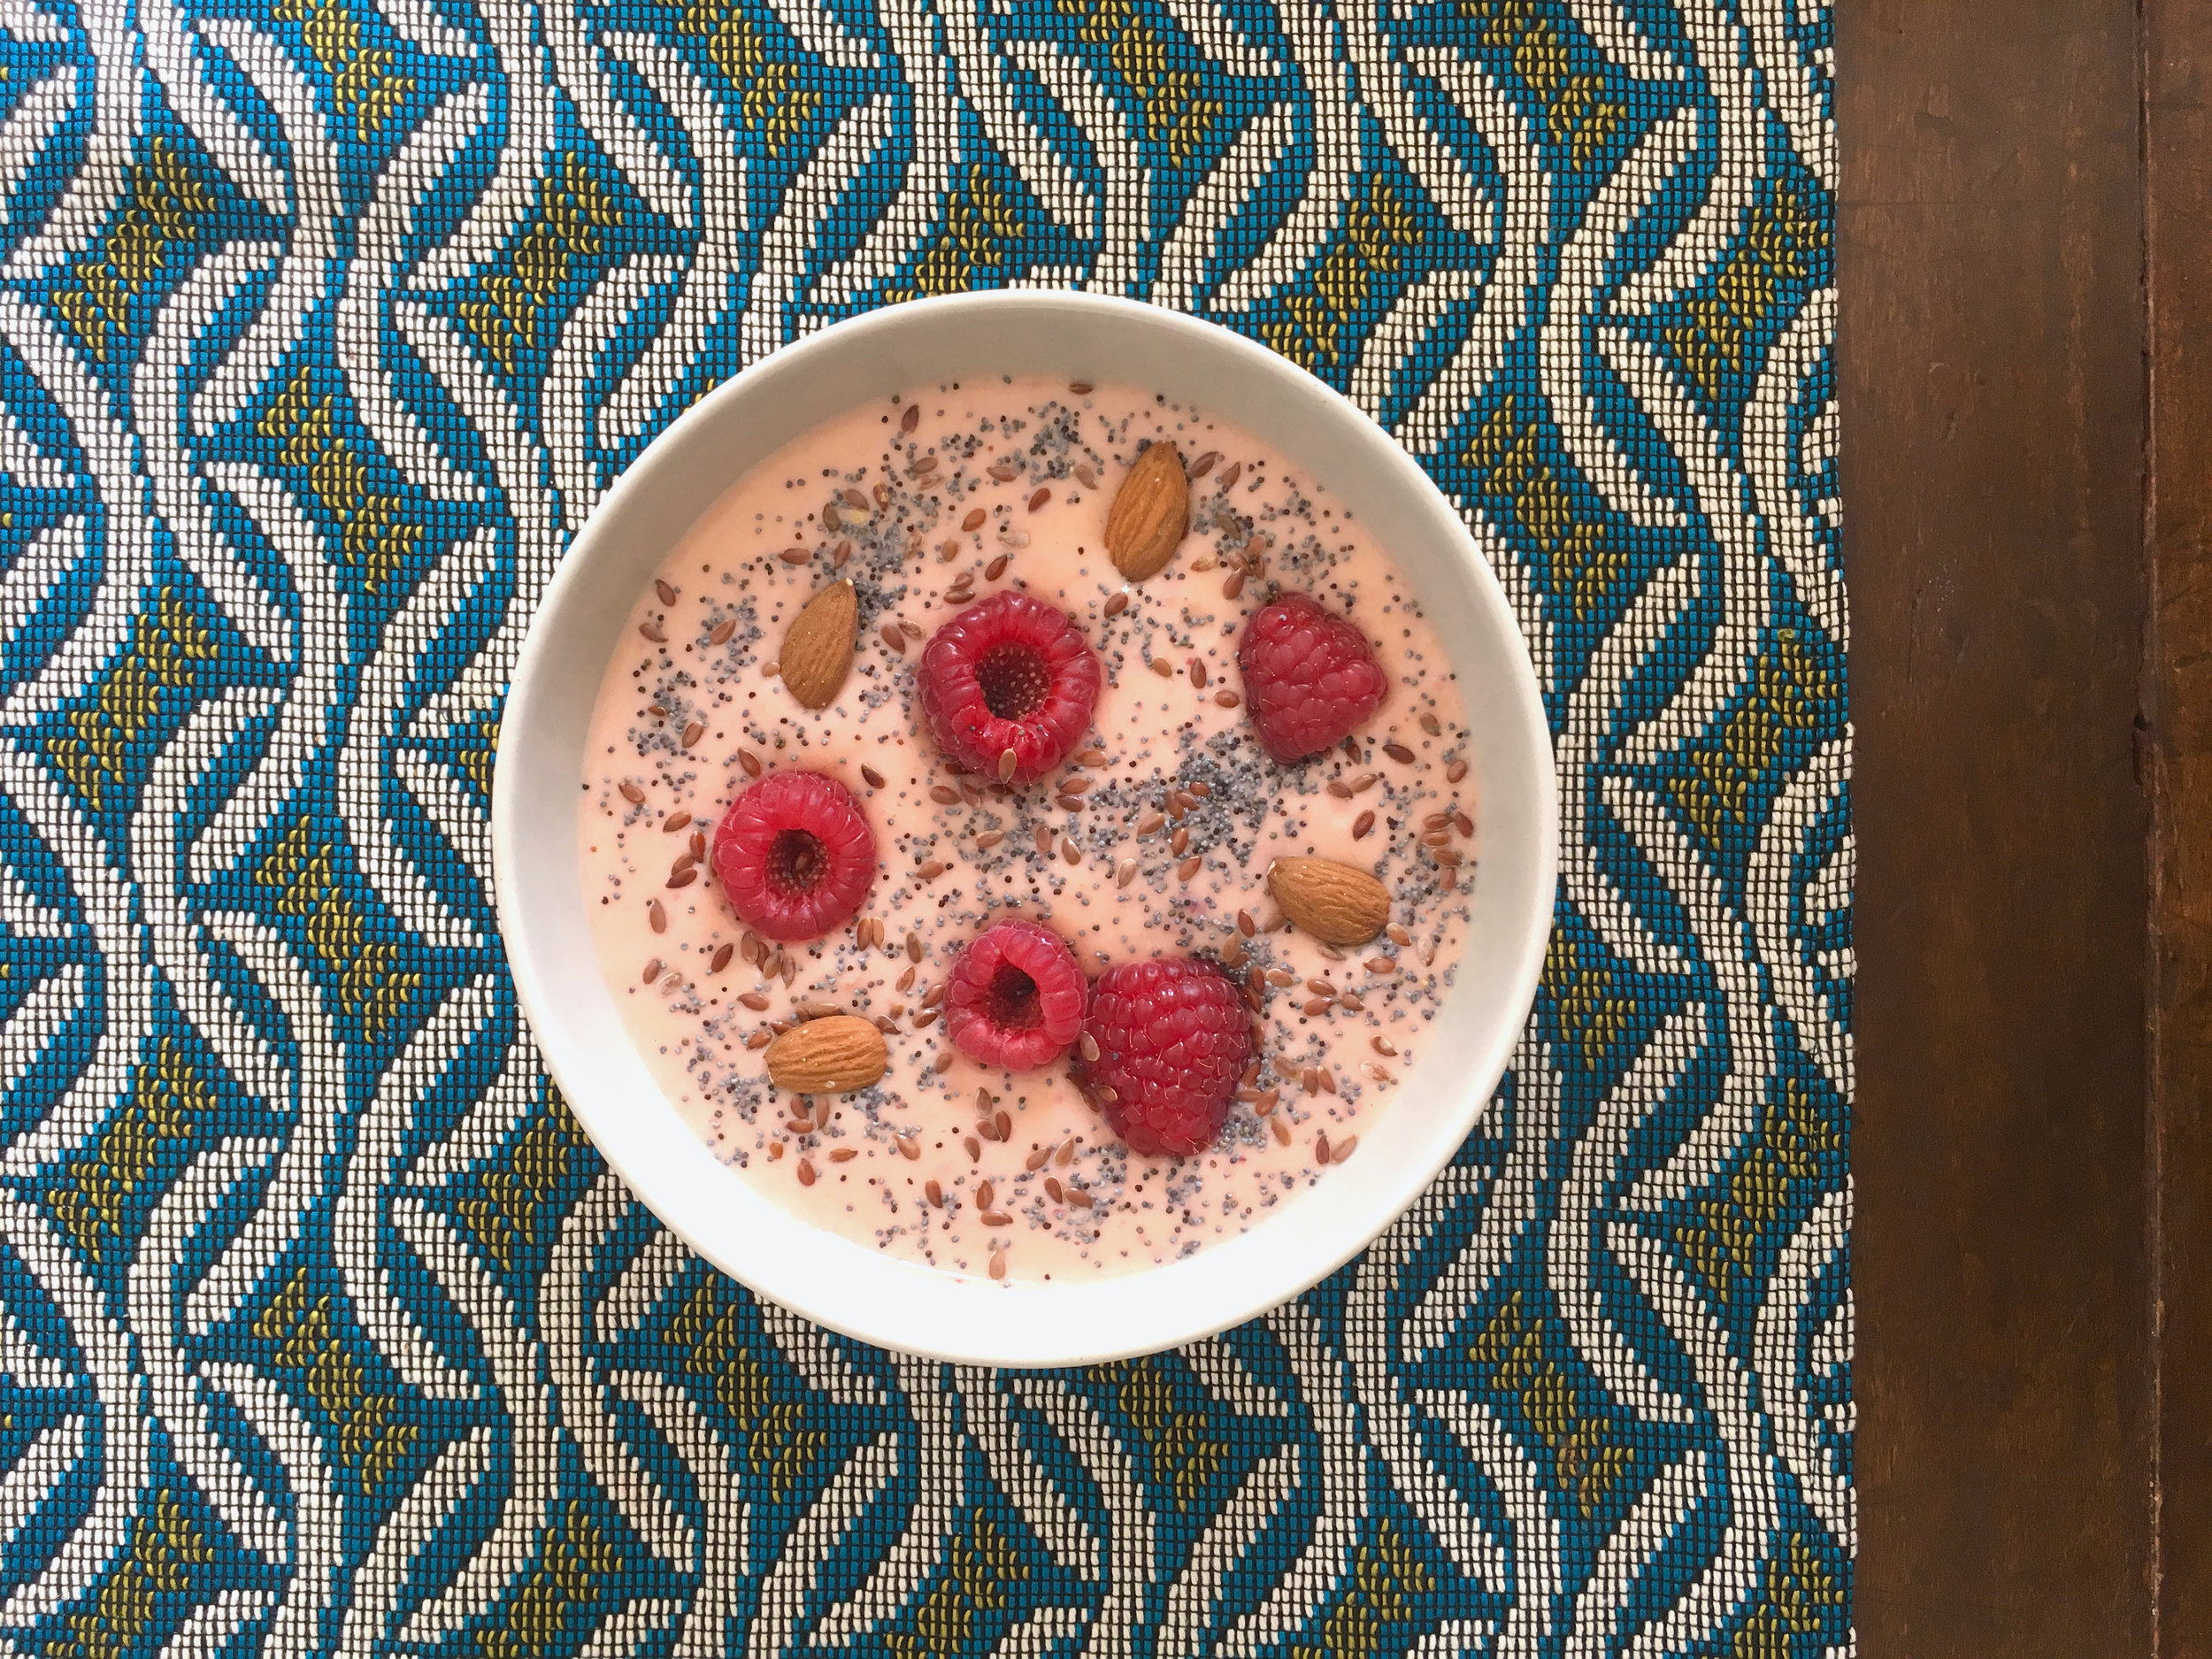 pink smoothie bowl with raspberries and almonds